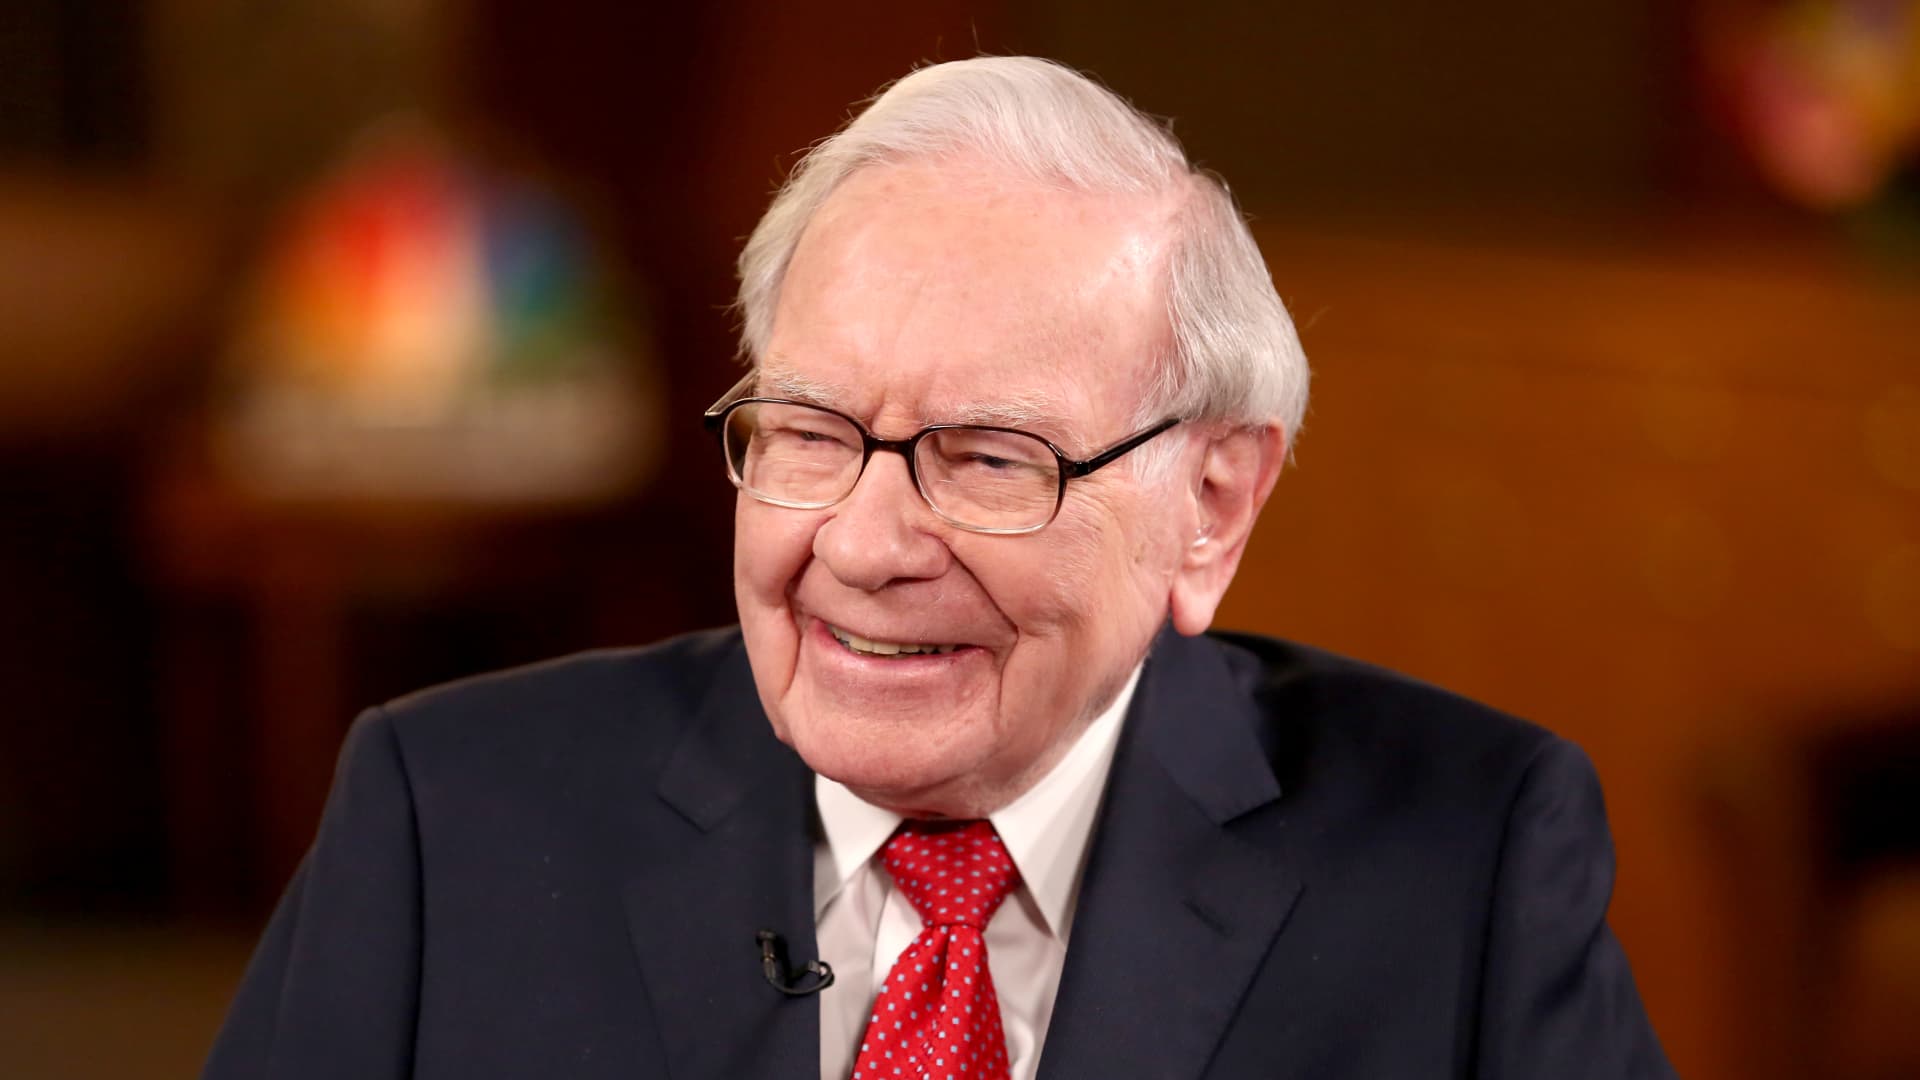 There's a new favorite stock among retail traders — and it's linked to Warren Buffett